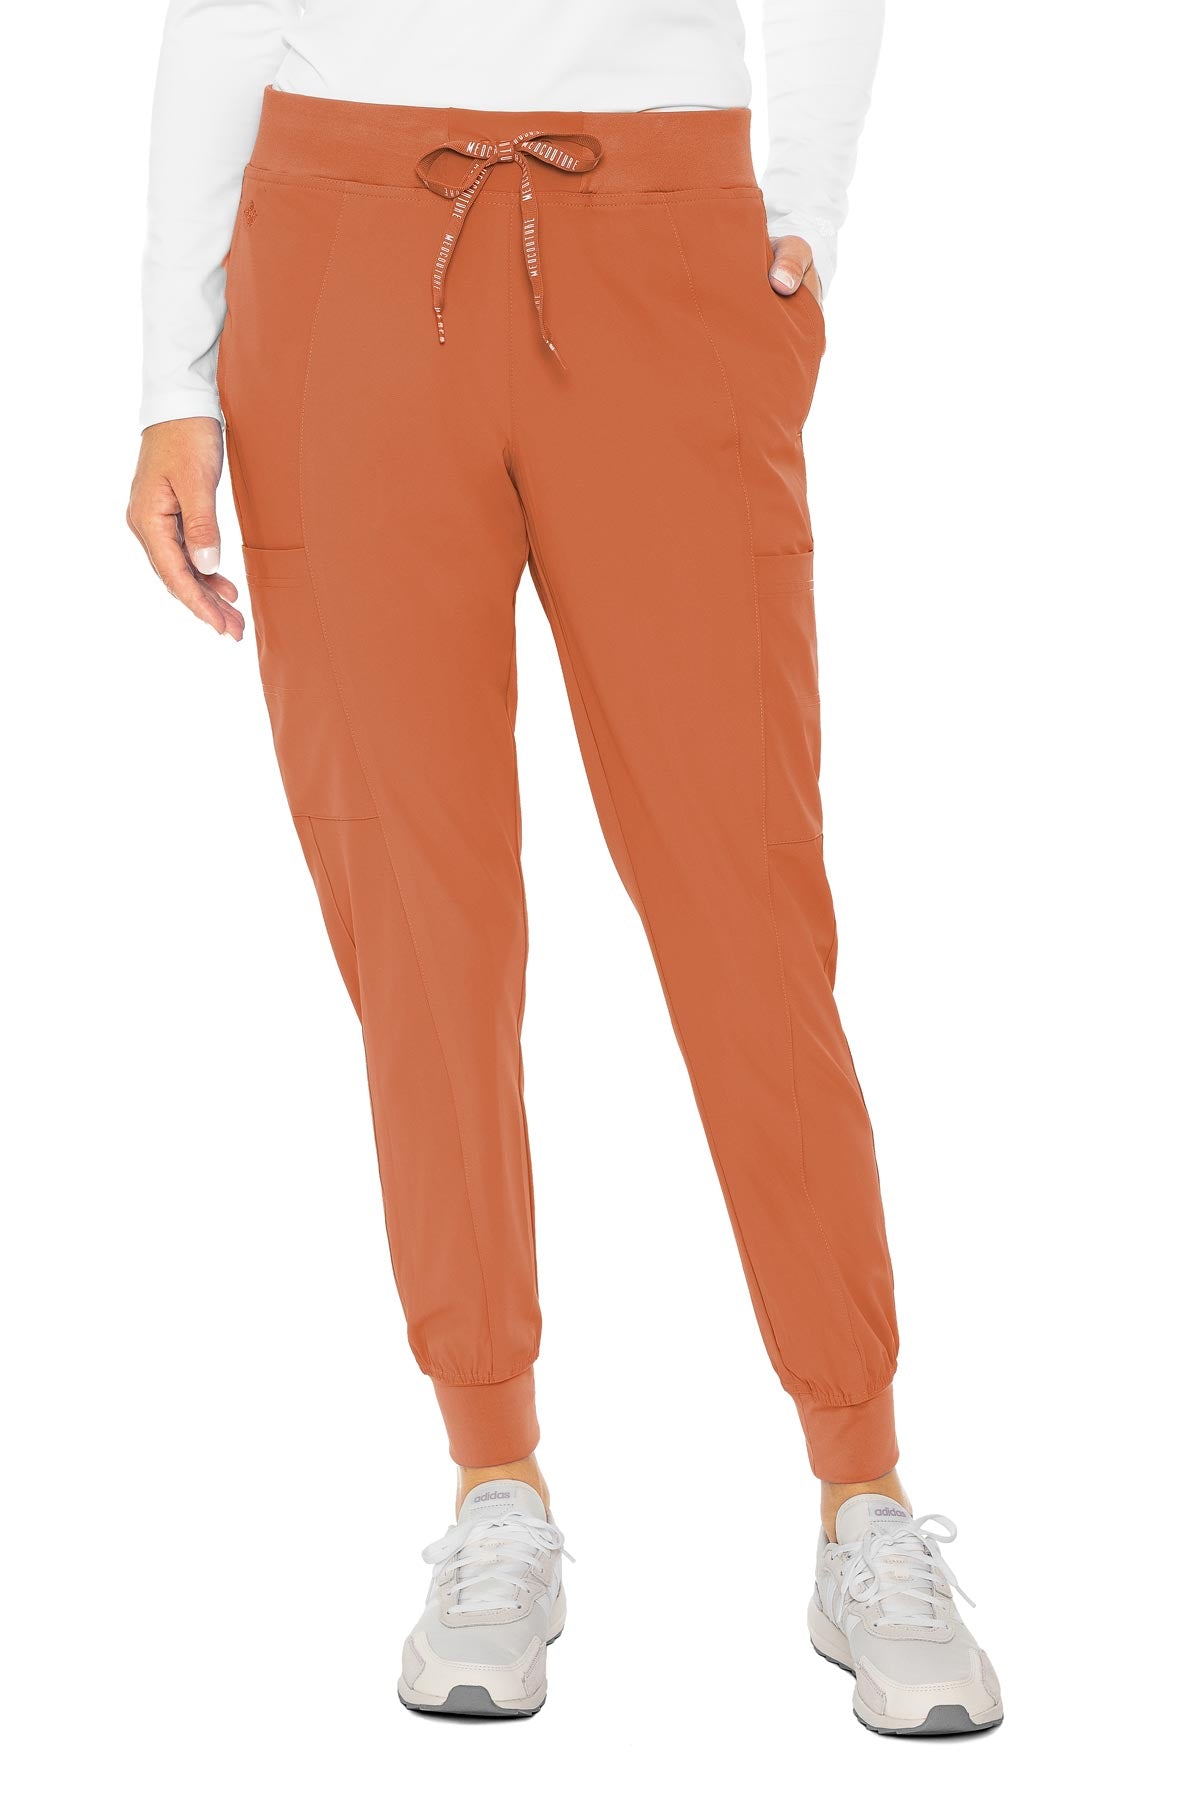 Med Couture Peaches Seamed Jogger Tall Length (XS-XL) – Berani Femme  Couture Scrubwear & Medical Supply